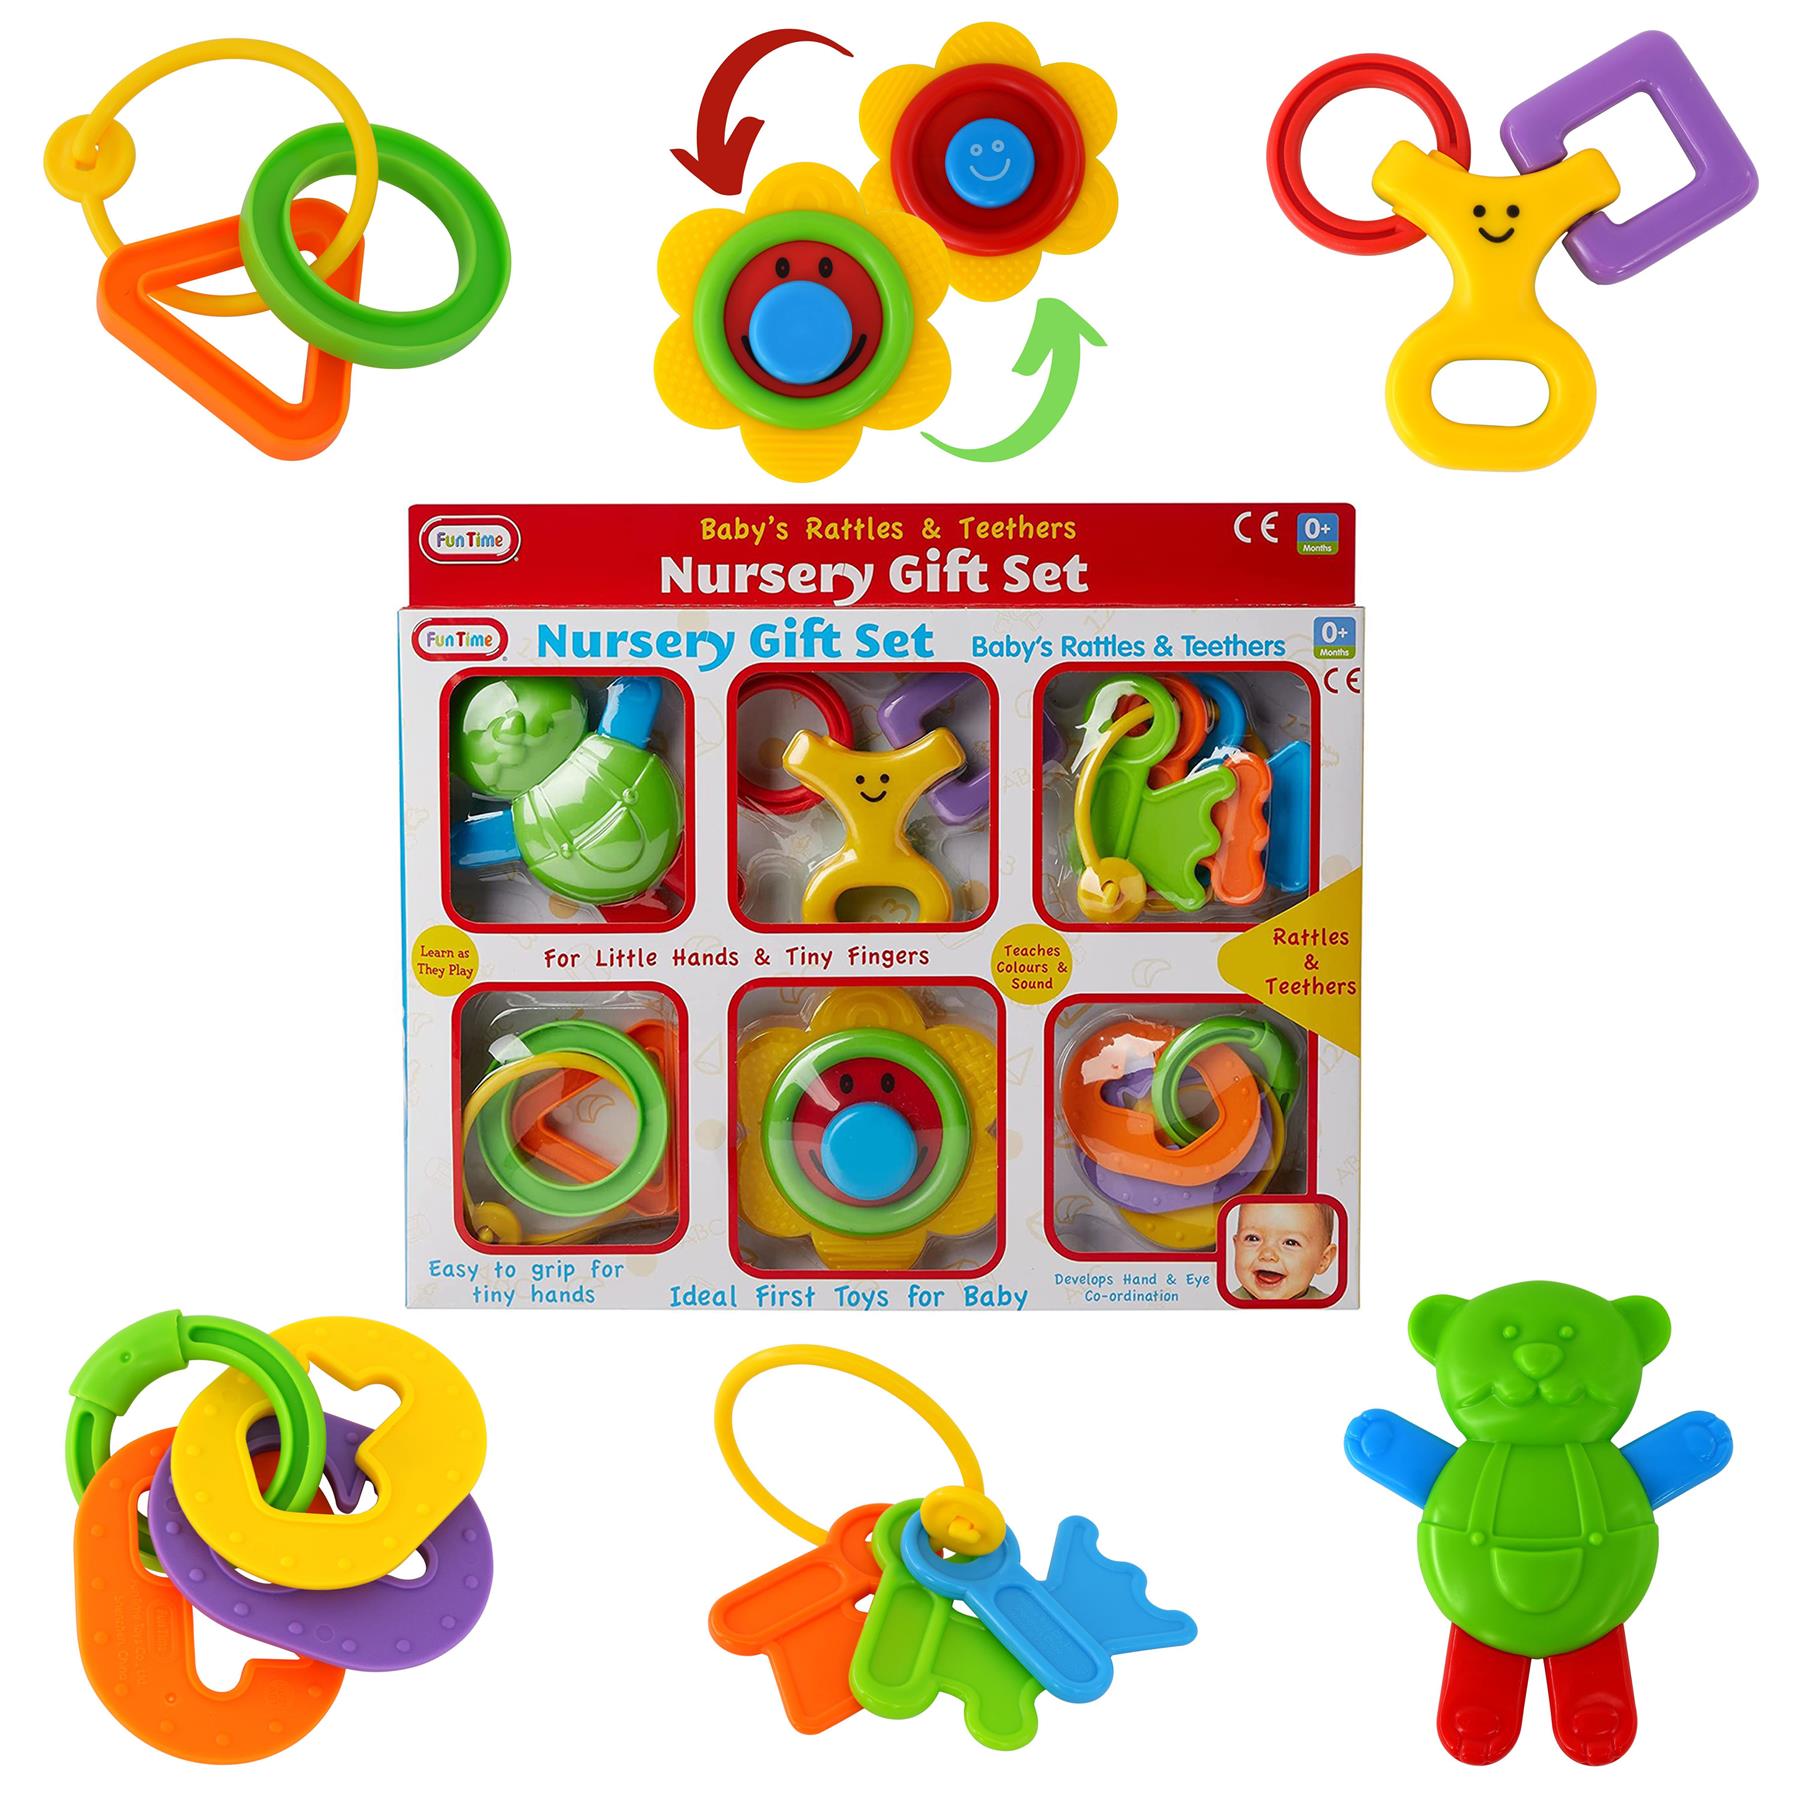 Baby Rattles And Teethers by The Magic Toy Shop - UKBuyZone